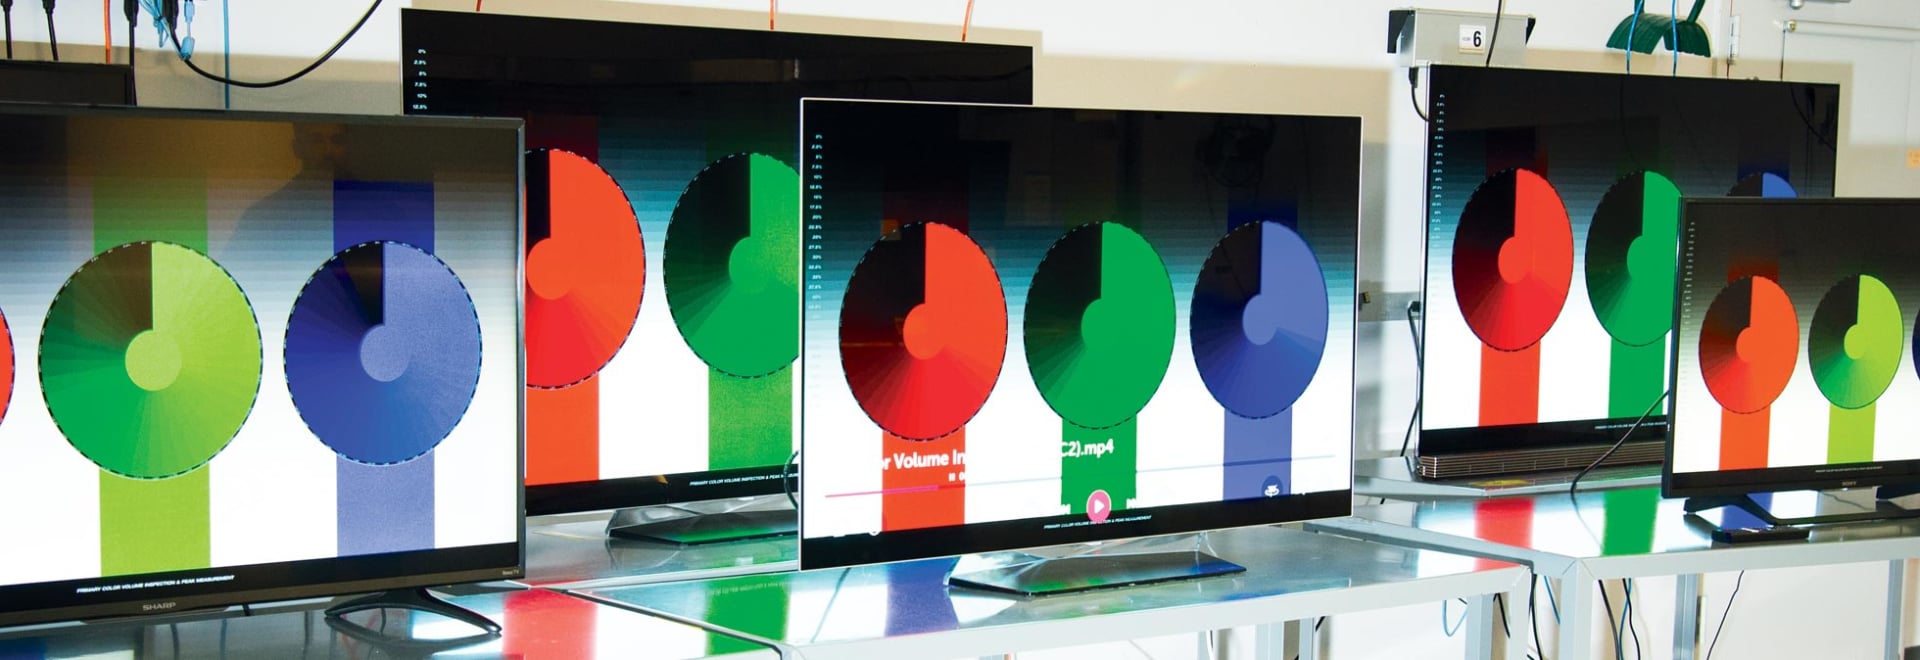 4K HDR TVs displaying a test pattern that shows whether a TV can maintain color intensity as brightness changes.